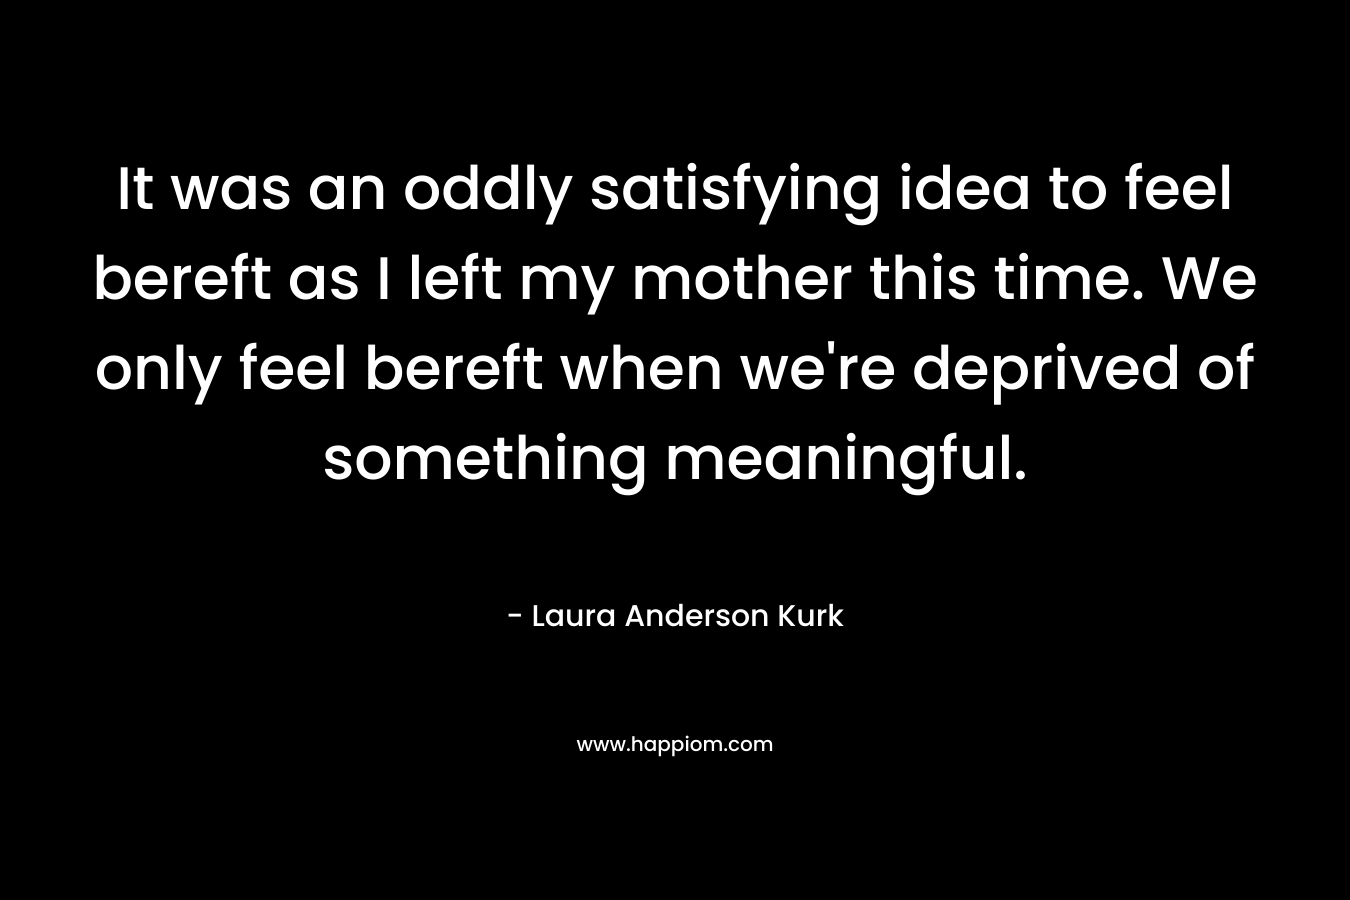 It was an oddly satisfying idea to feel bereft as I left my mother this time. We only feel bereft when we’re deprived of something meaningful. – Laura Anderson Kurk